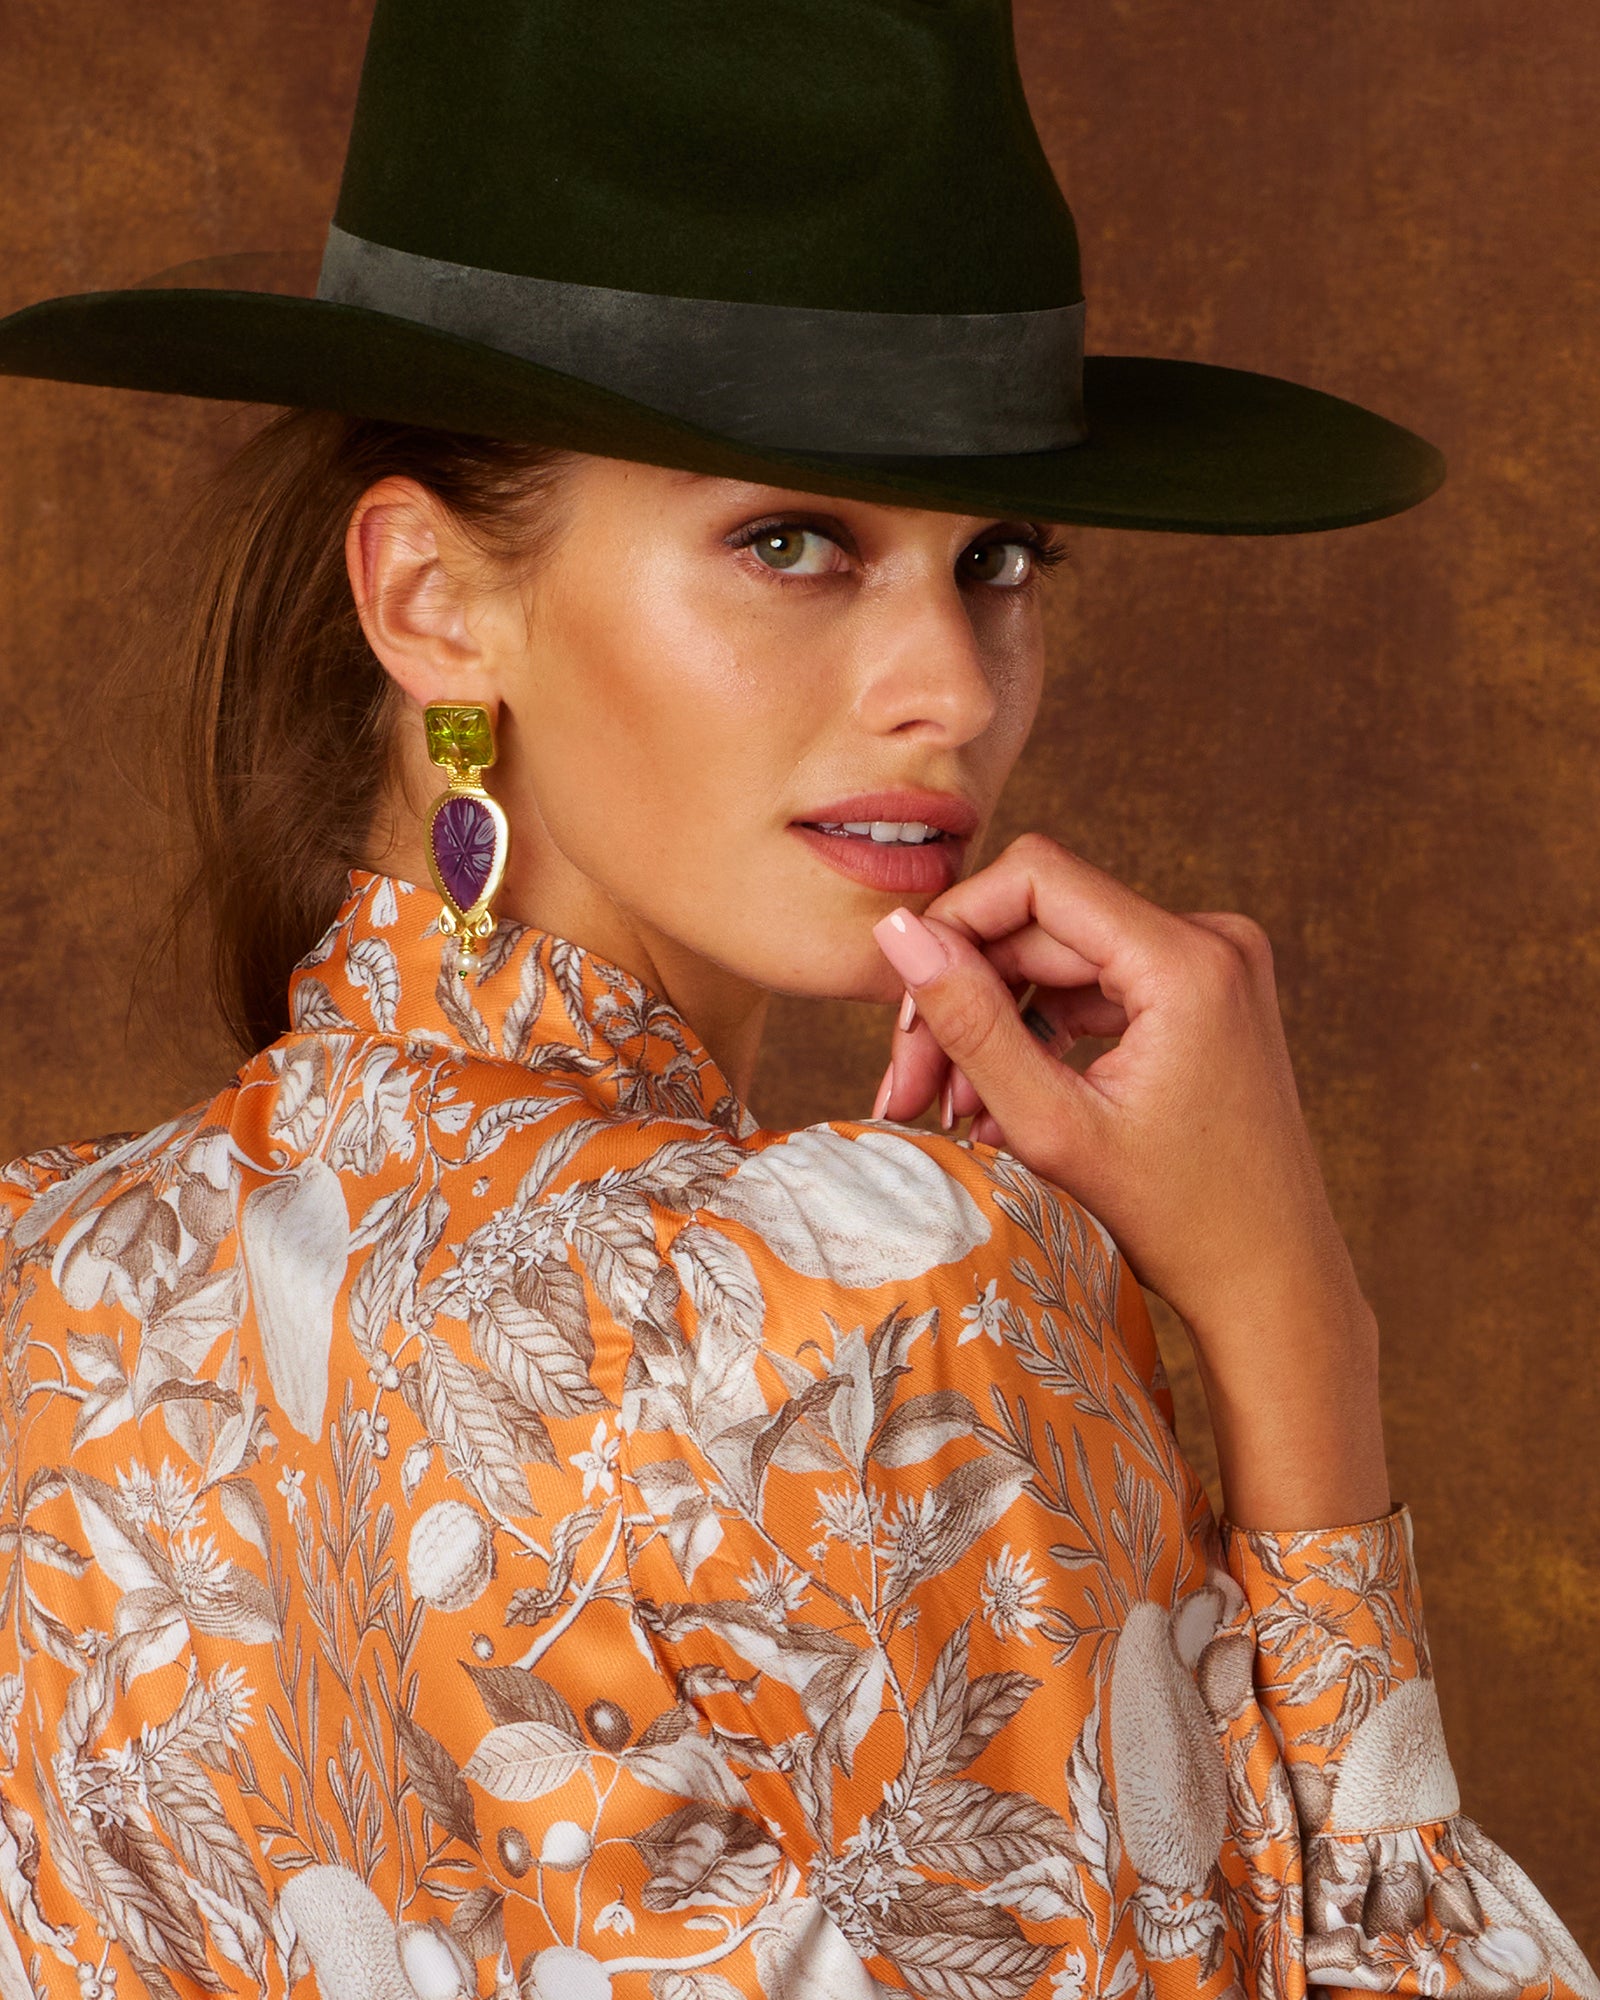 Harper Earrings in Lime Green and Amethyst Purple-Worn with Orange Blouse and hat